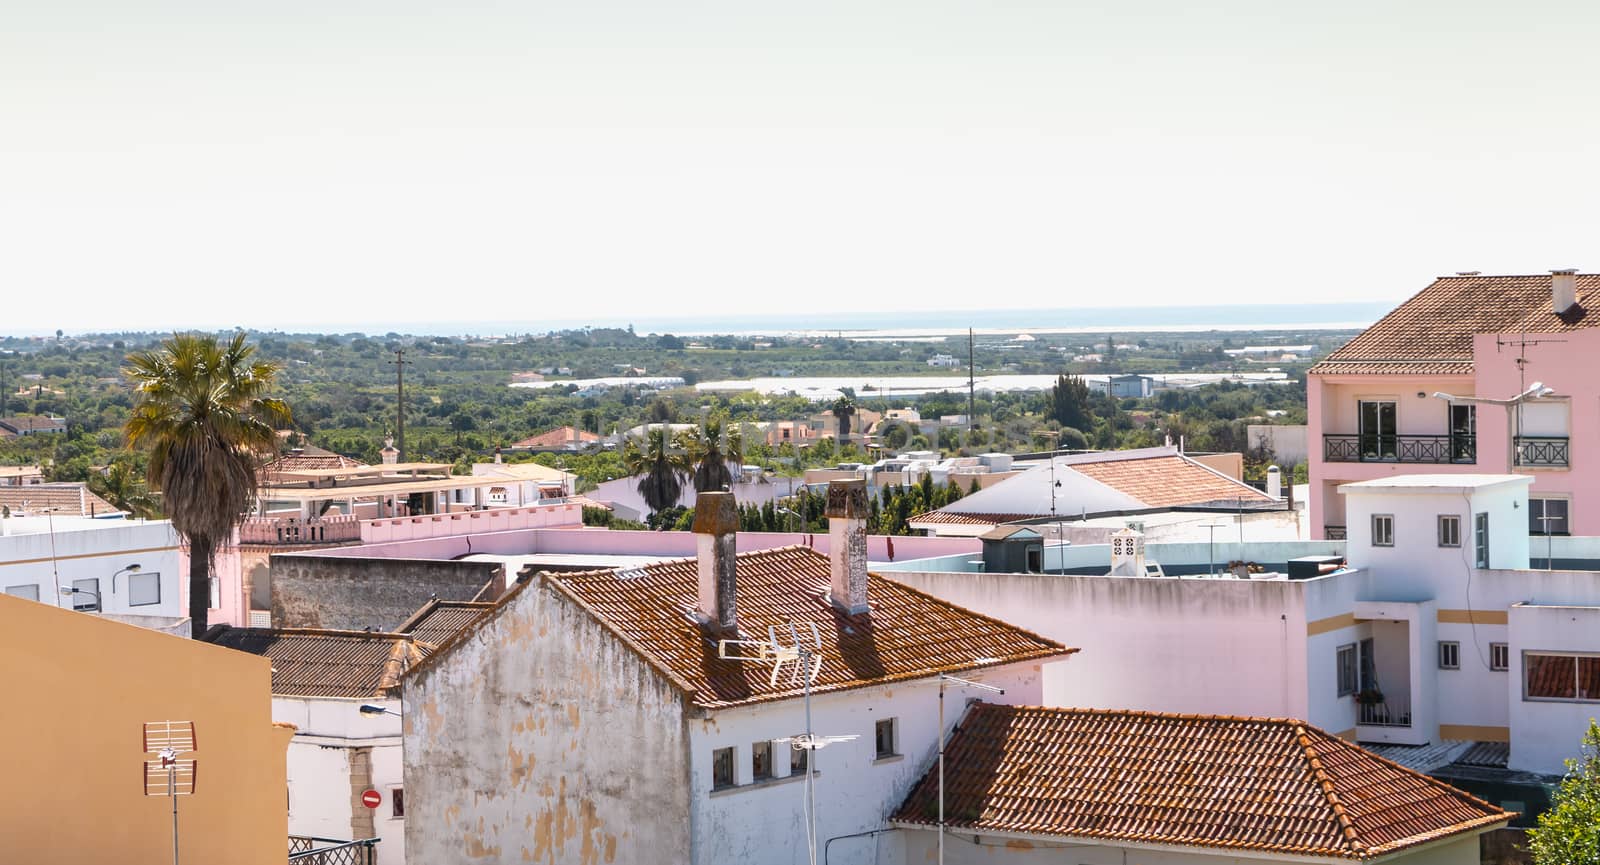 Moncarapacho, Portugal - May 4, 2018: view over the roofs of houses with typical architecture on a spring day